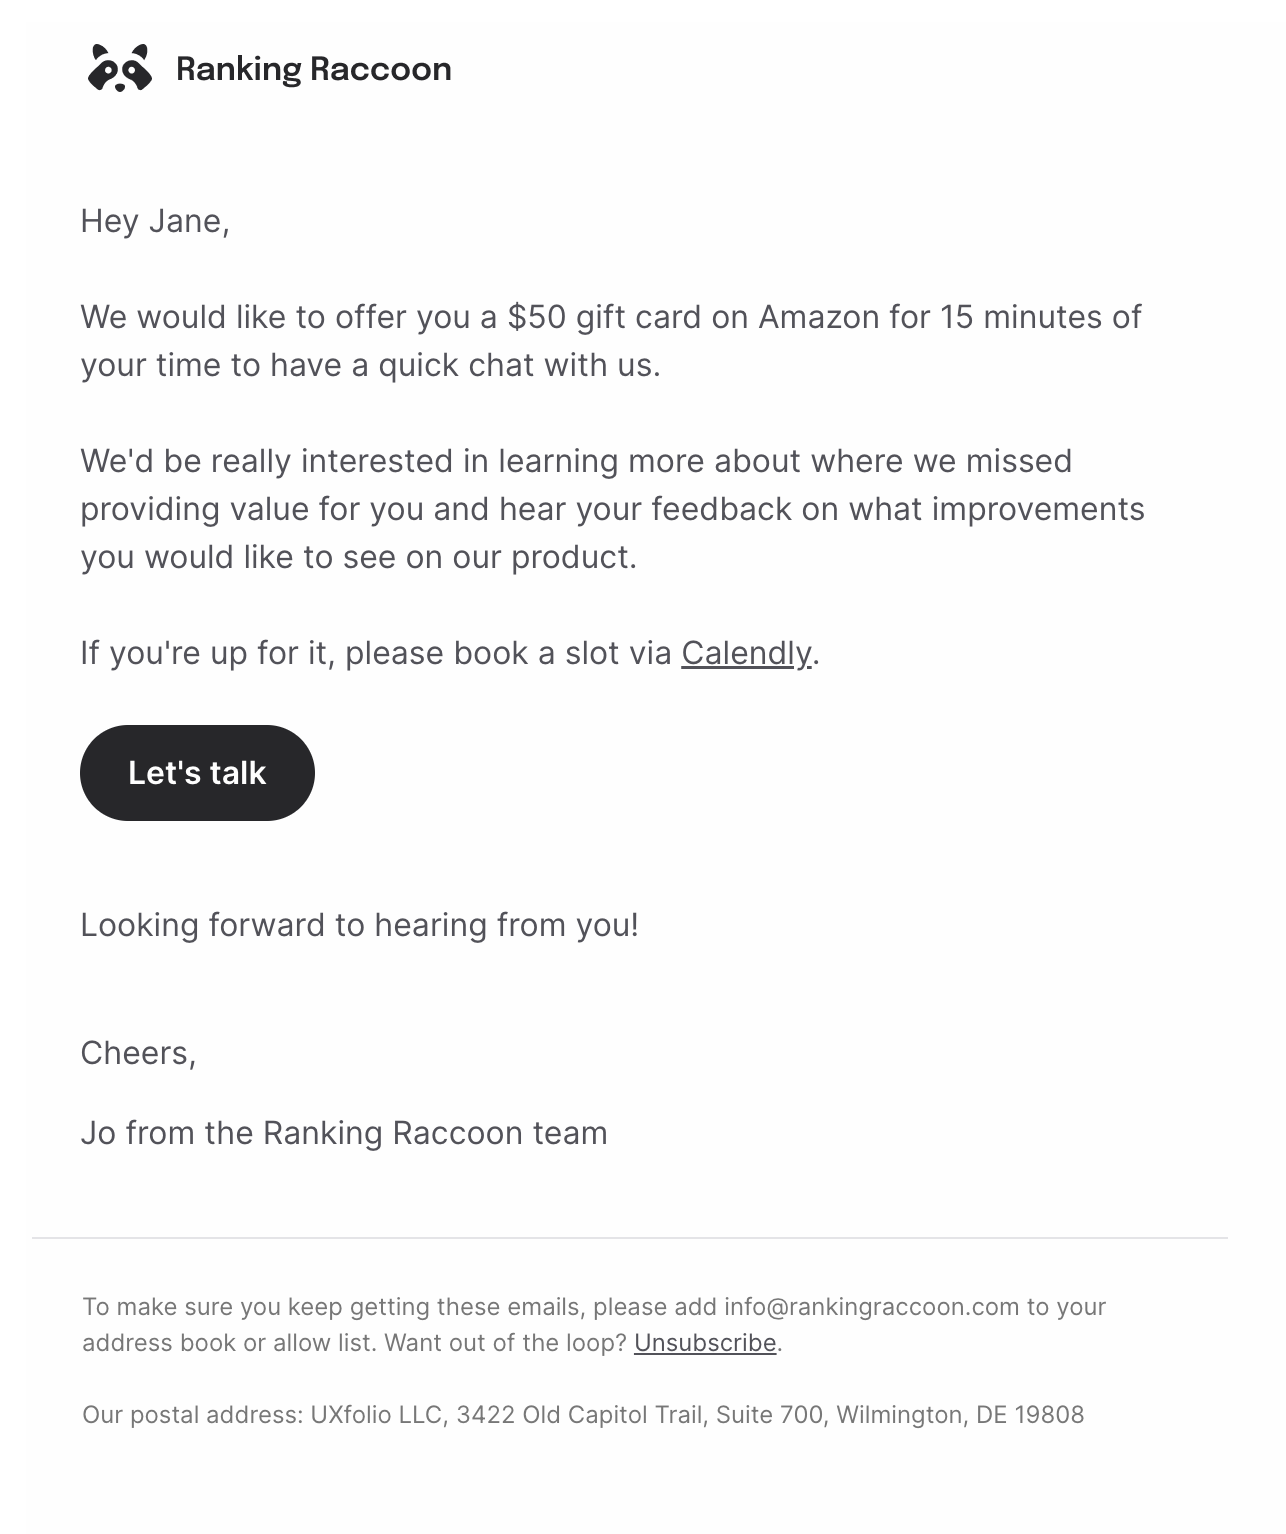 Grammarly letting you know after you complete their survey you aren't  eligible and they won't be sending you a Starbucks gift card :  r/assholedesign